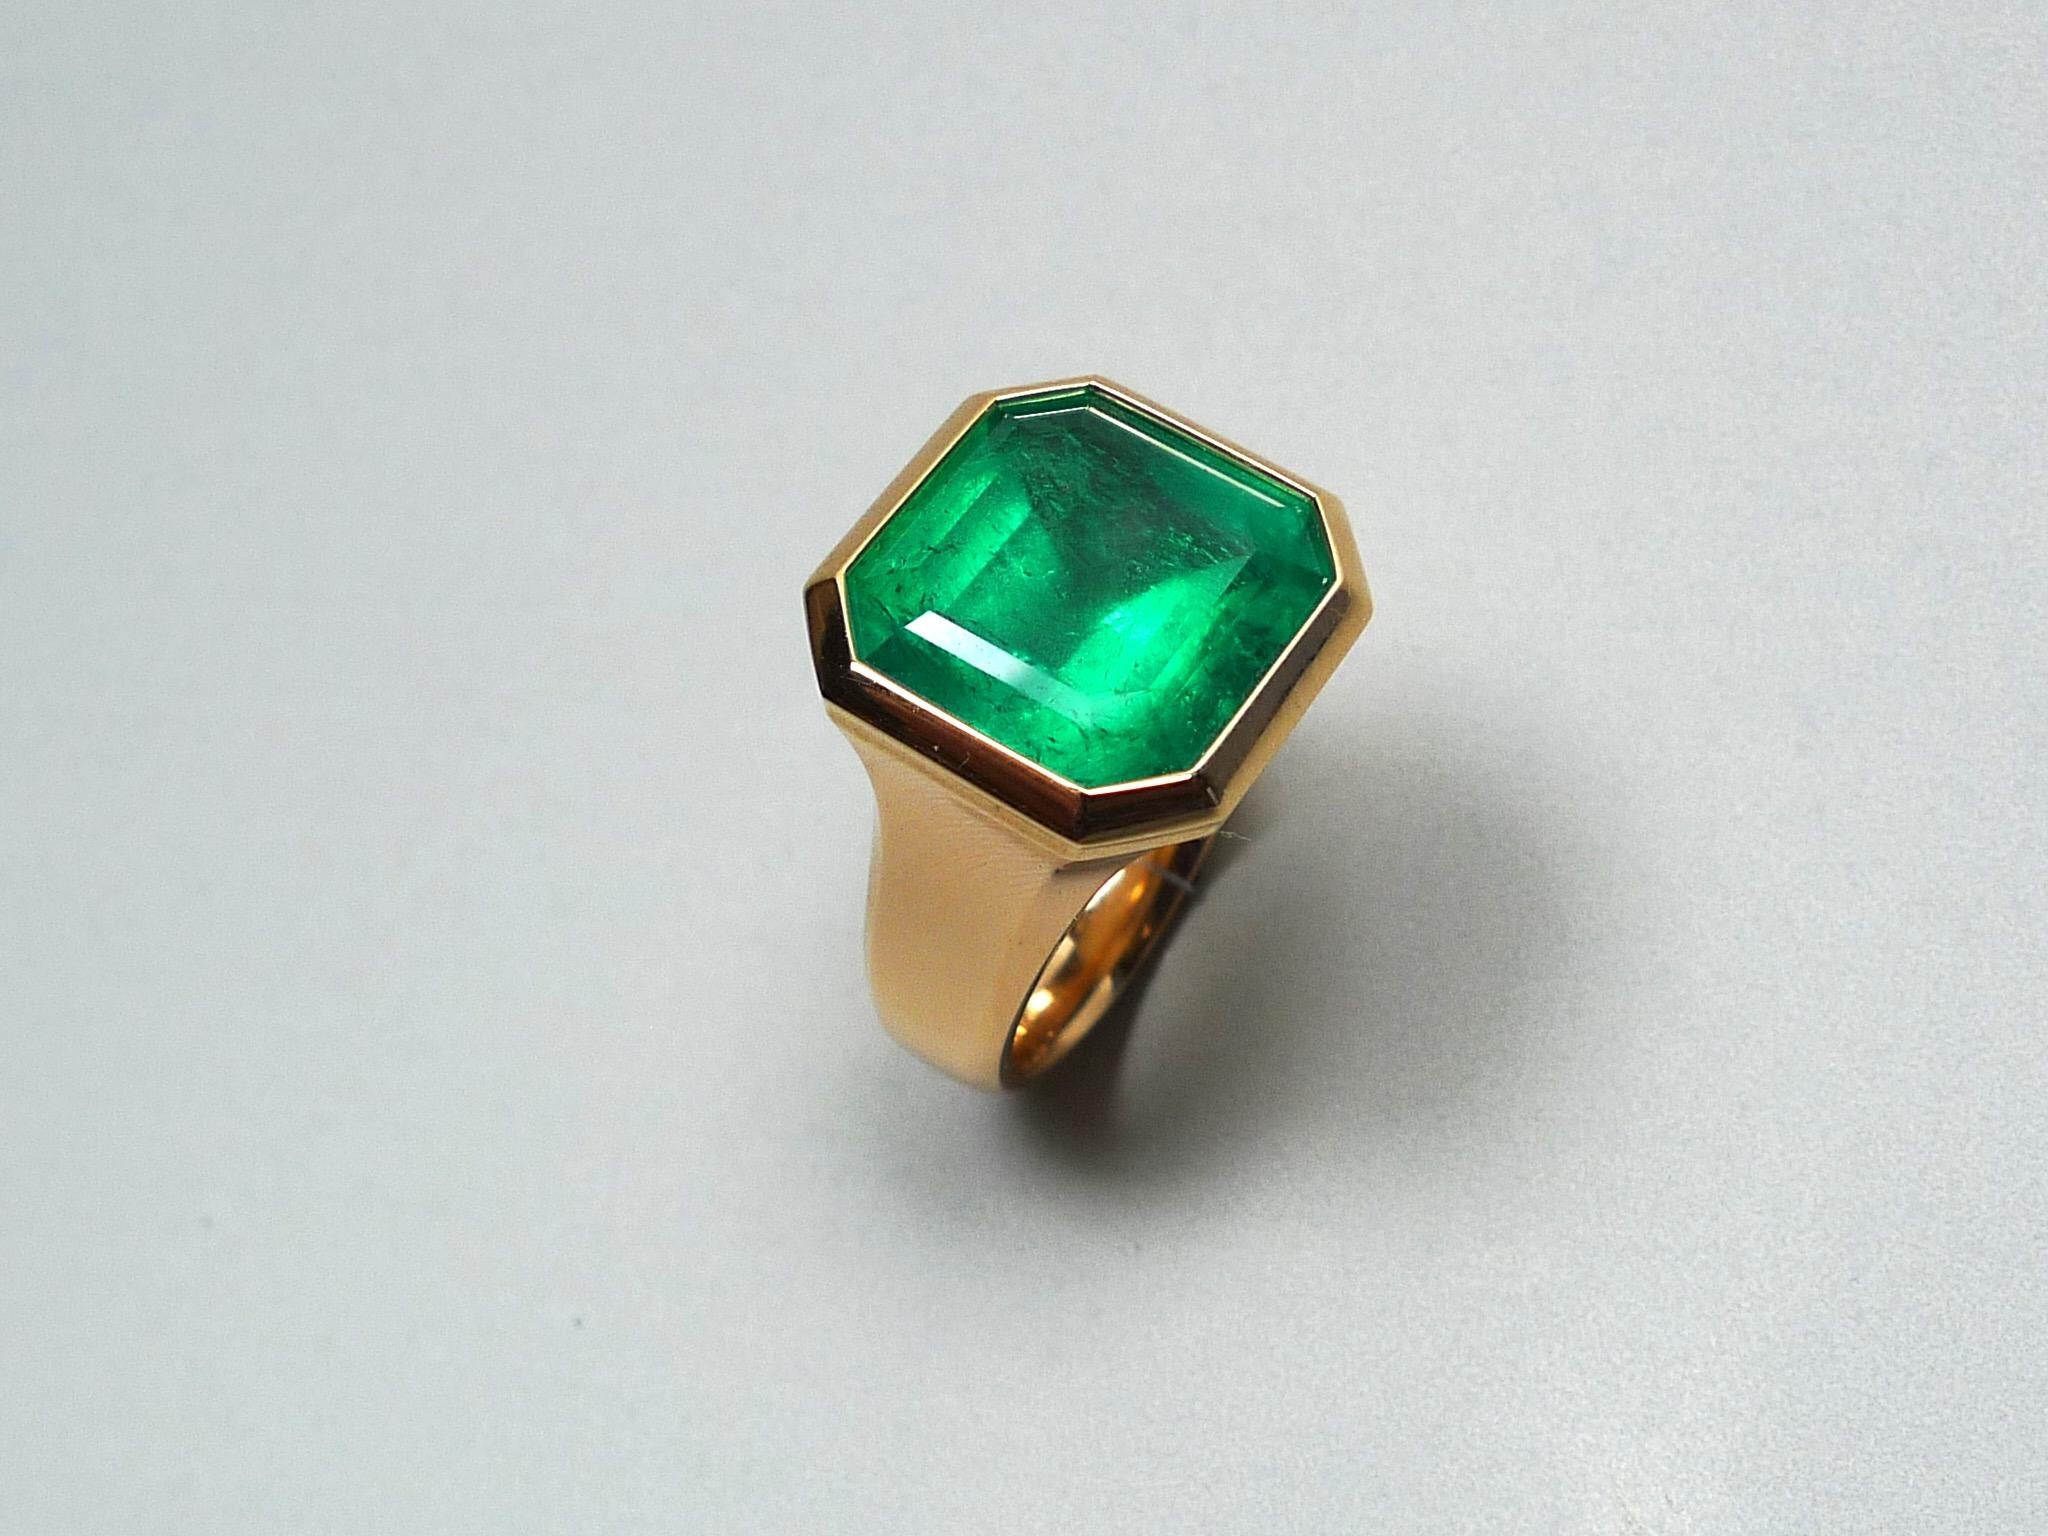 CLASSIC GIFT is my name. Elegant classical Colombian emerald ring, handcrafted in solid 18 karat rose gold. Showcasing a high class quality natural Colombian emerald, with no treatments, except 